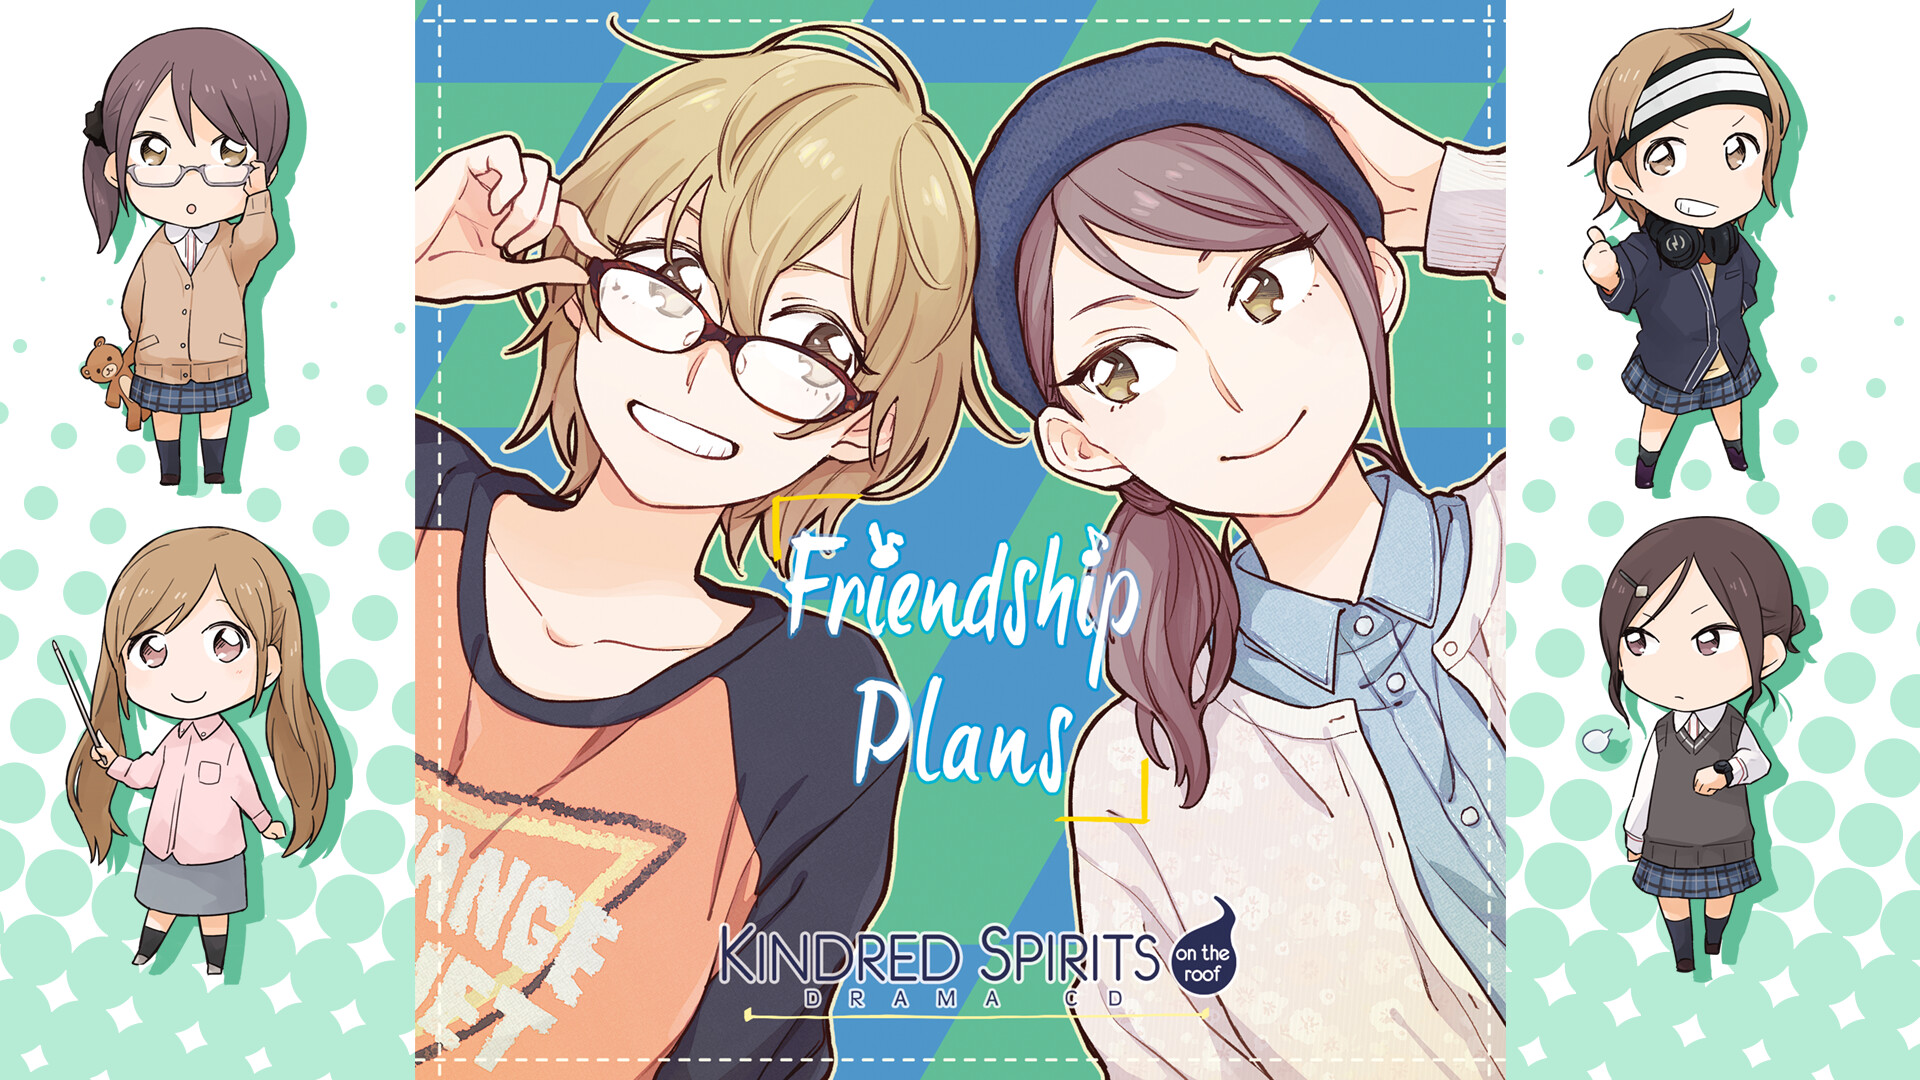 Kindred Spirits on the Roof Drama CD Vol.2 - Friendship Plans Featured Screenshot #1